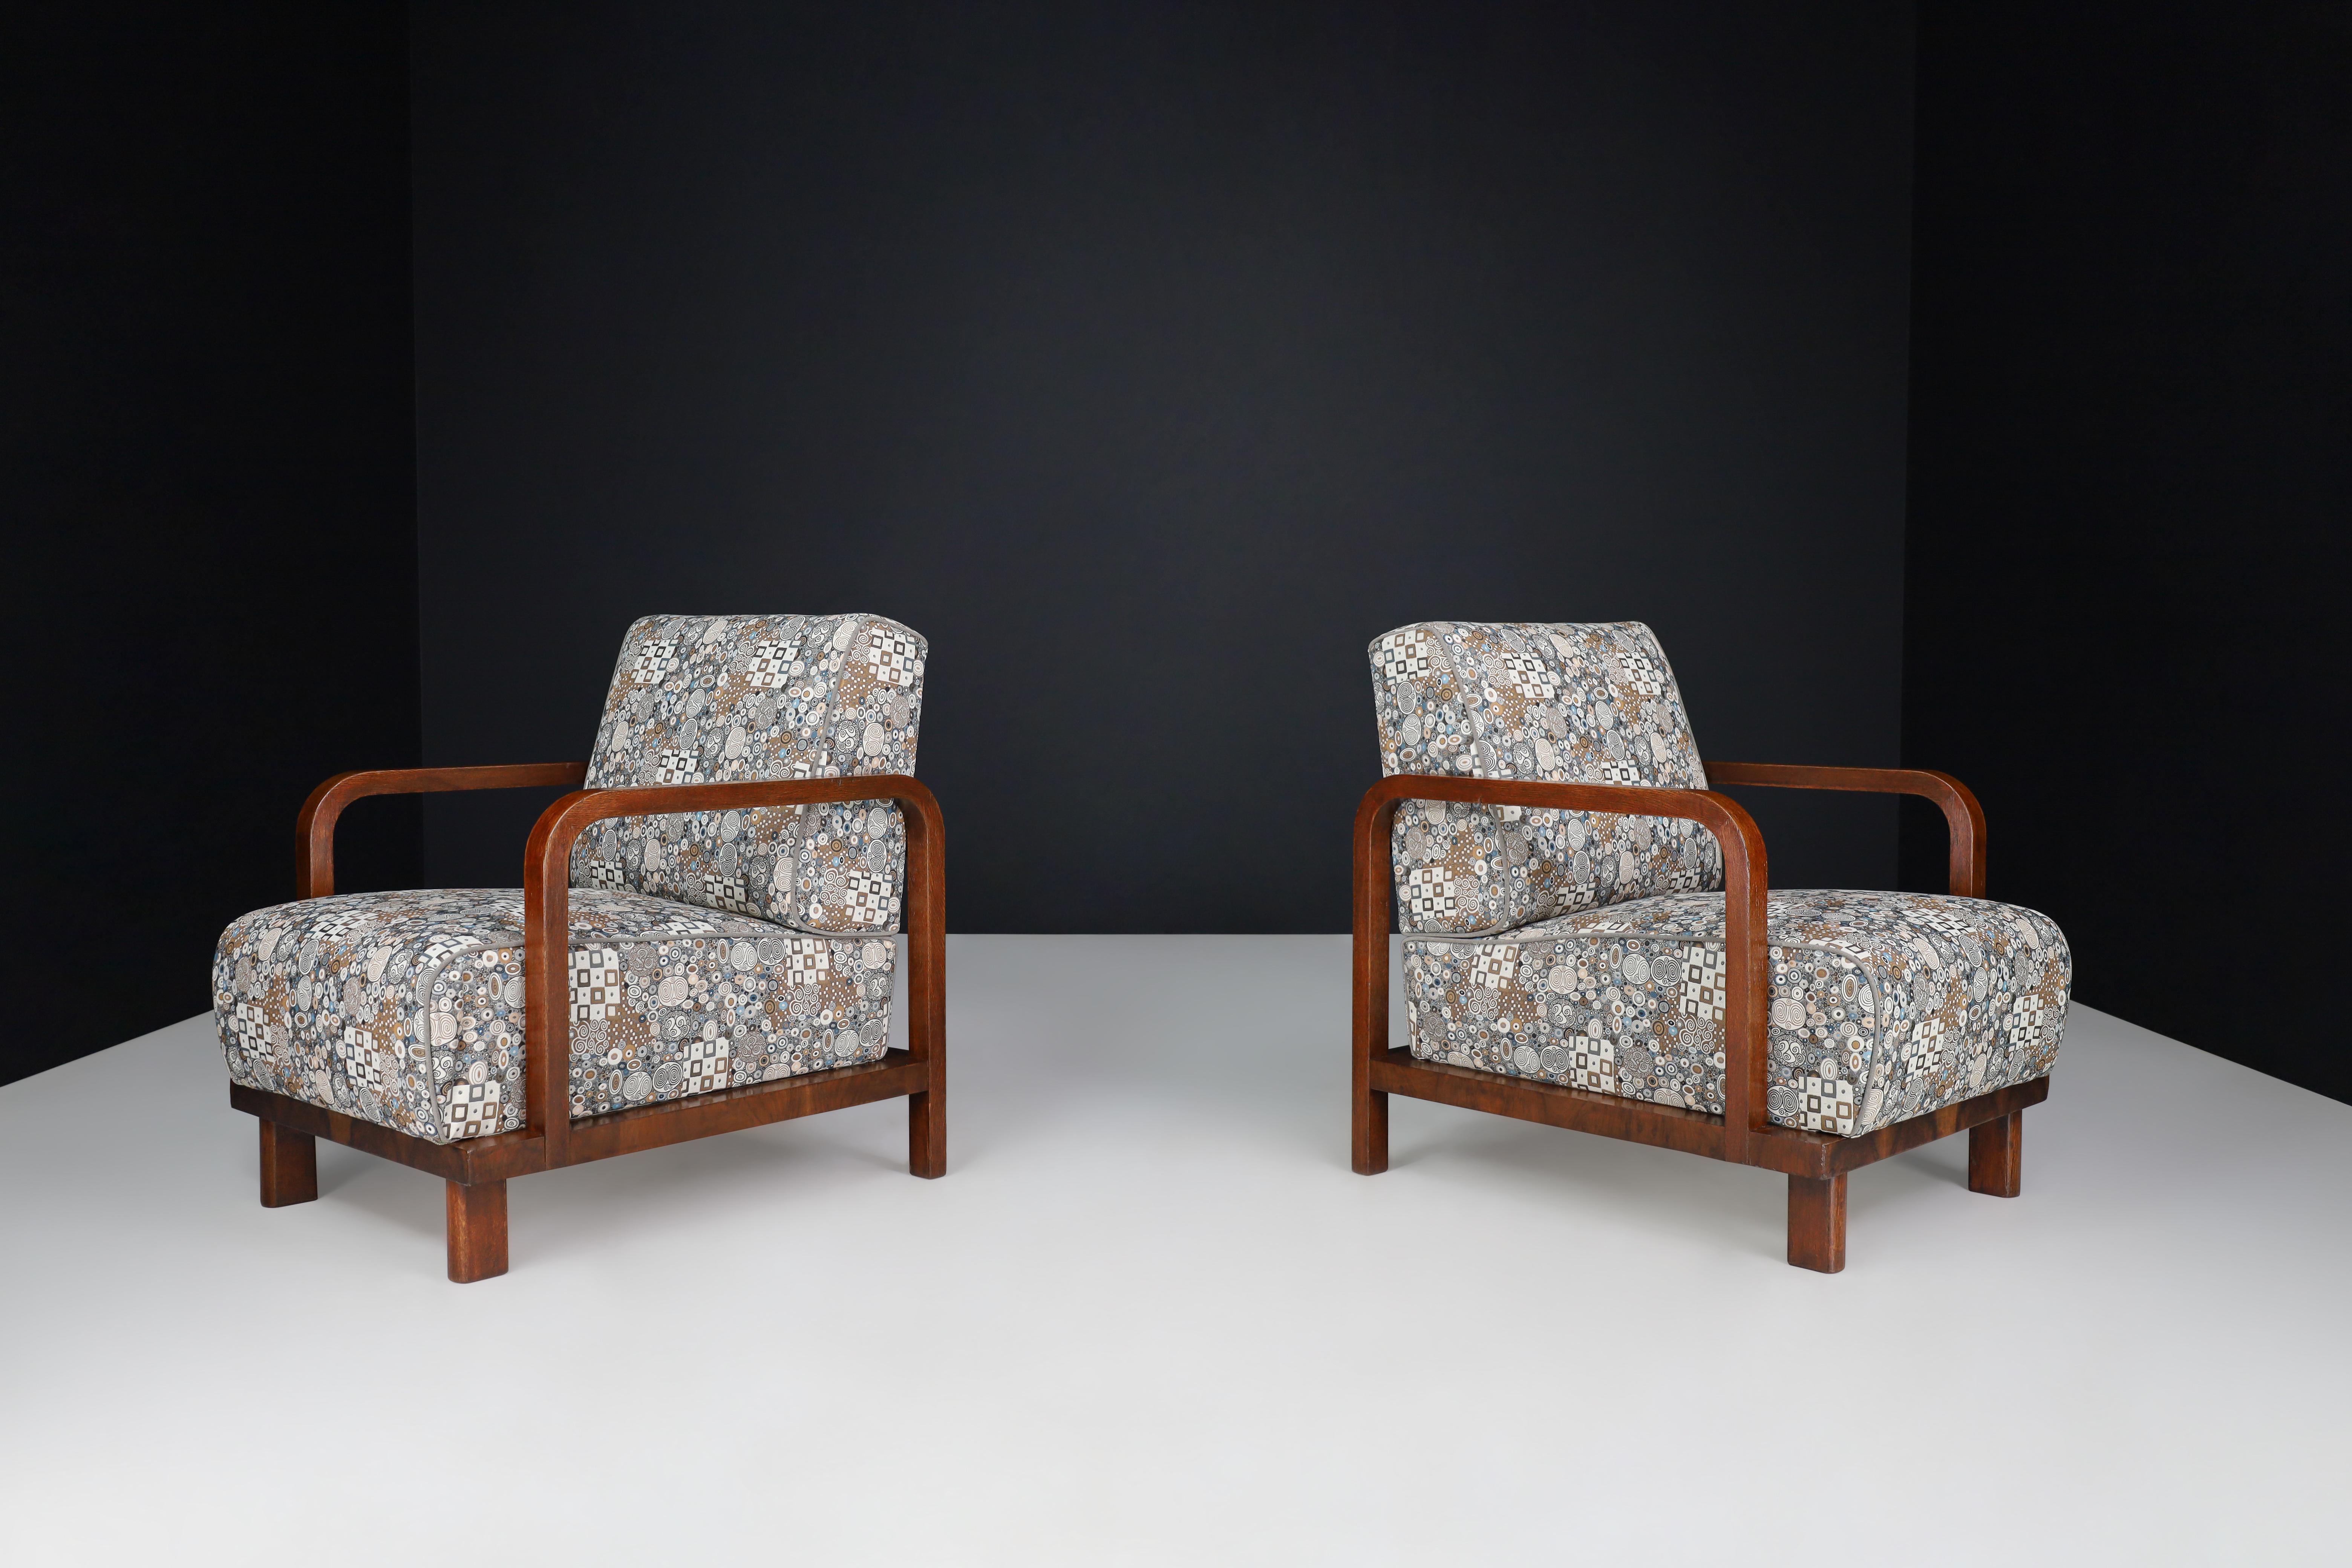 Pair of Two Art Deco Lounge Chairs Re-upholstered  Art Deco Fabric, France 1930s

These two lounge armchairs have an Art-Deco design and are crafted from Walnut Bentwood. They were re-upholstered with fine fabric and created in France in the 1930s.